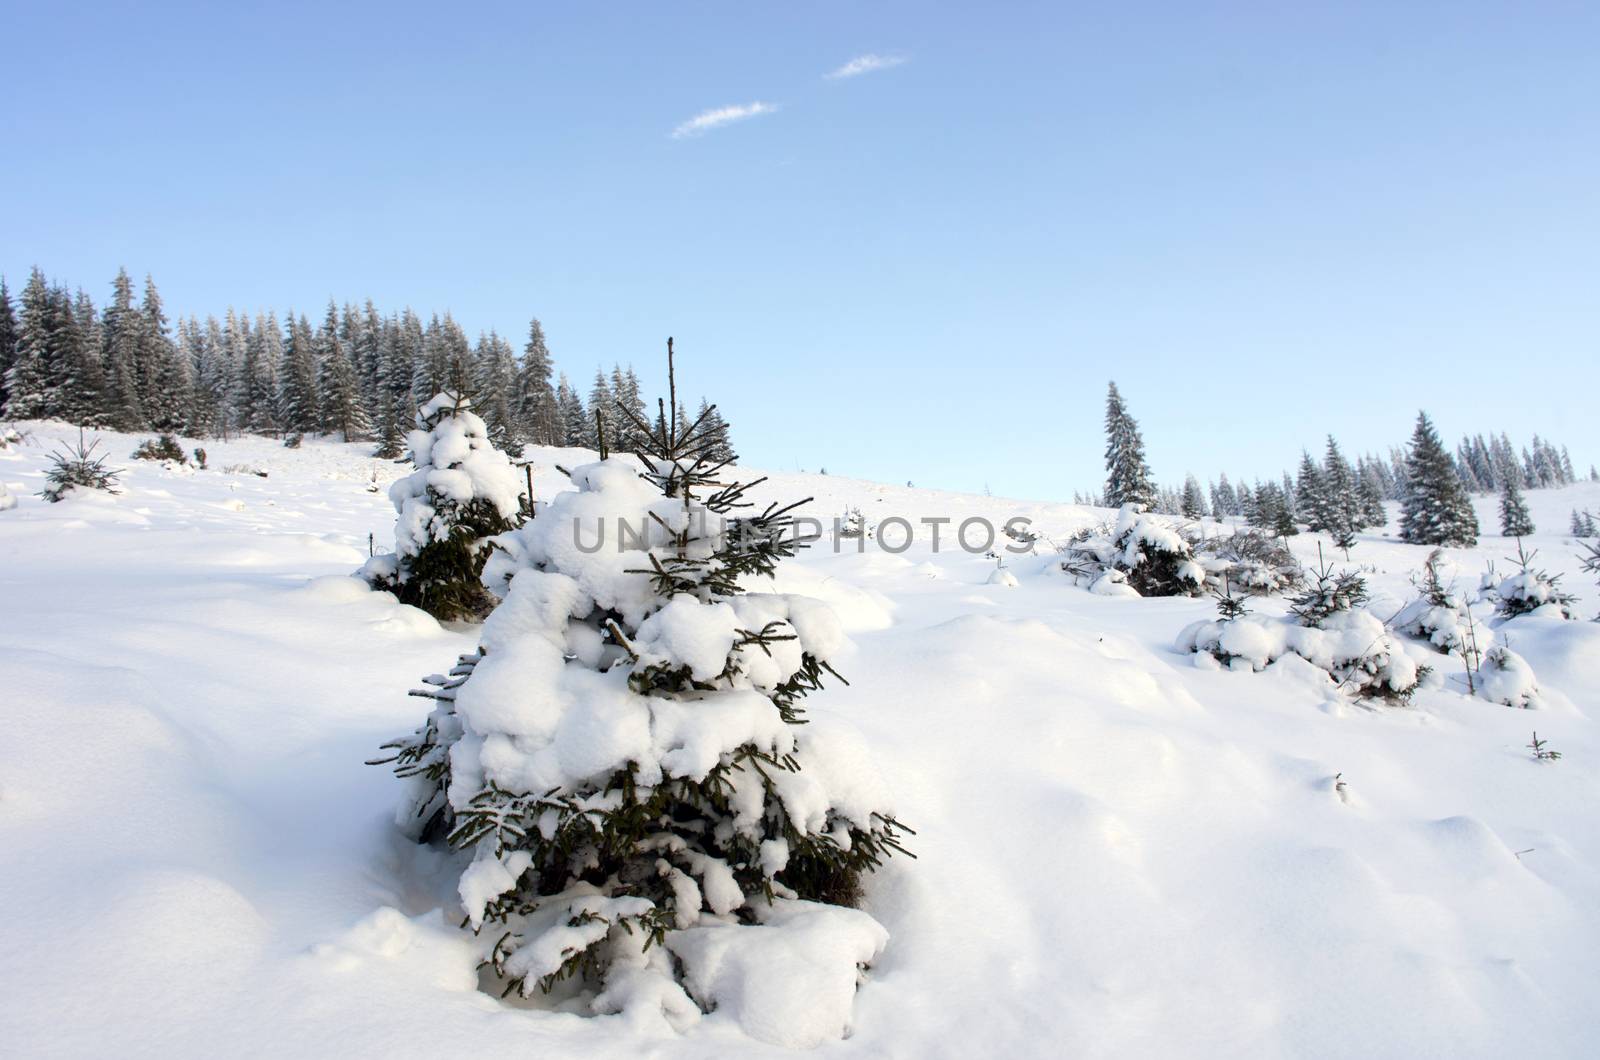 winter calm mountain landscape with rime and snow covered spruce trees (view from Bukovel ski resort (Ukraine)